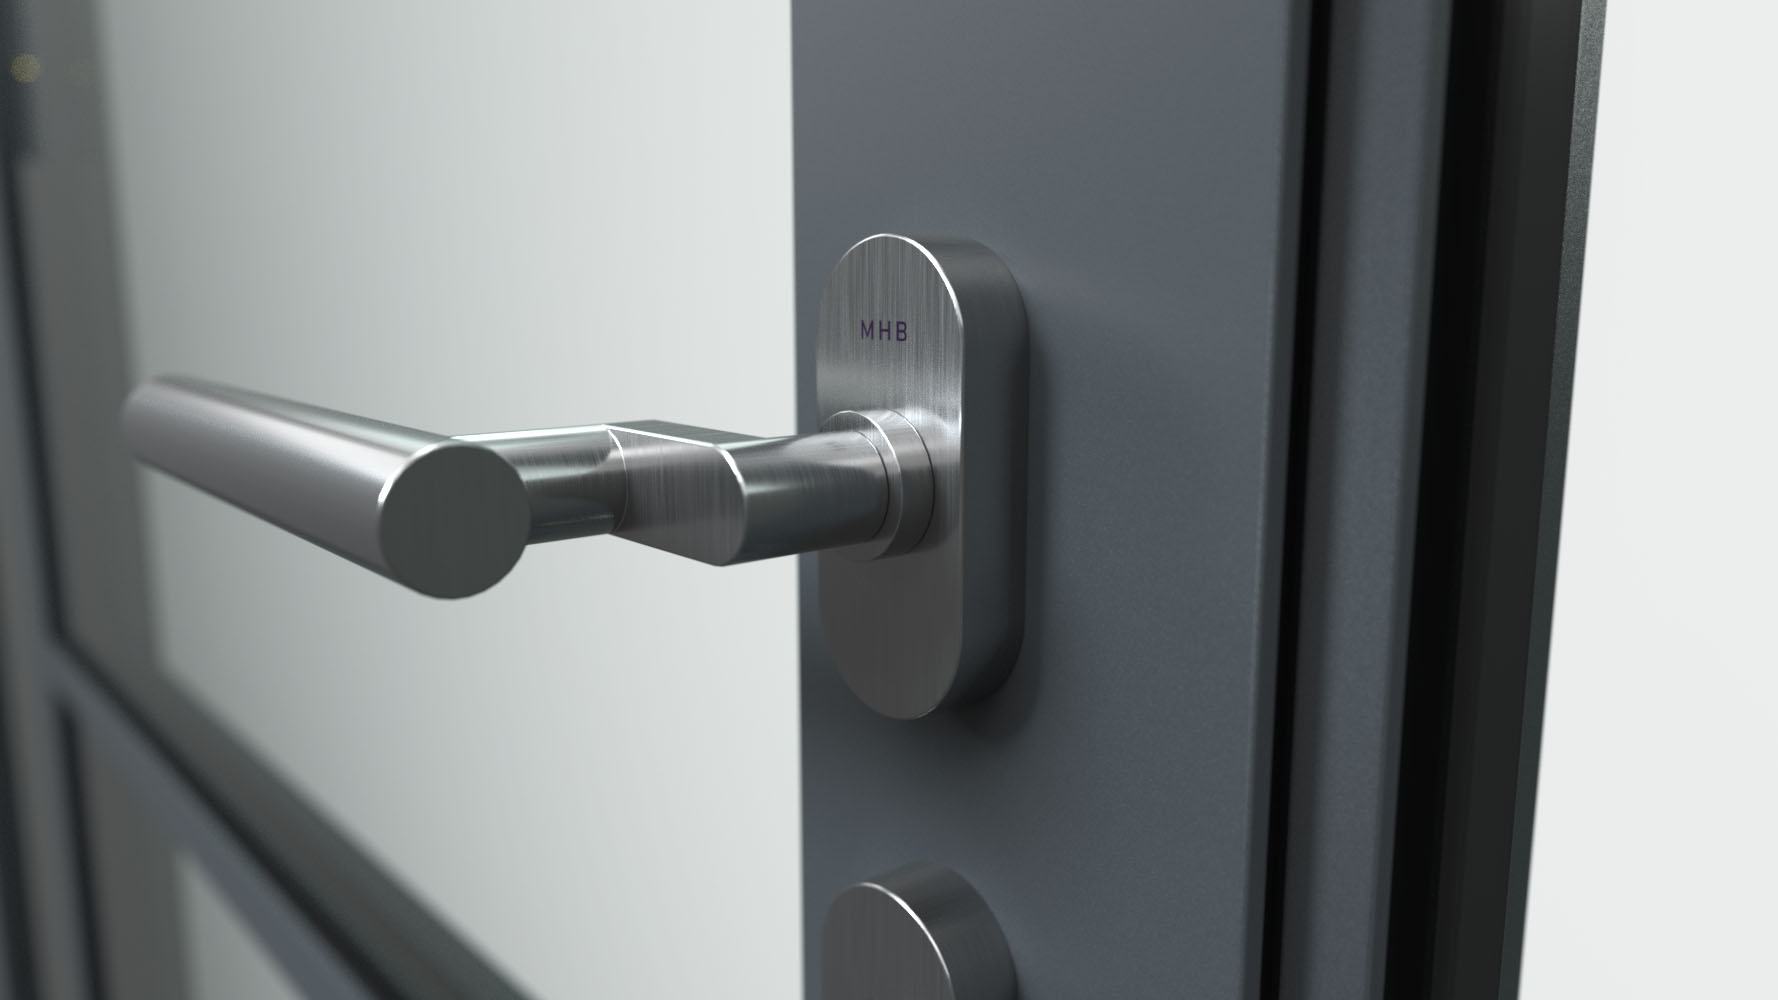 3d closeup of MHB stainless steel handles and escutcheons